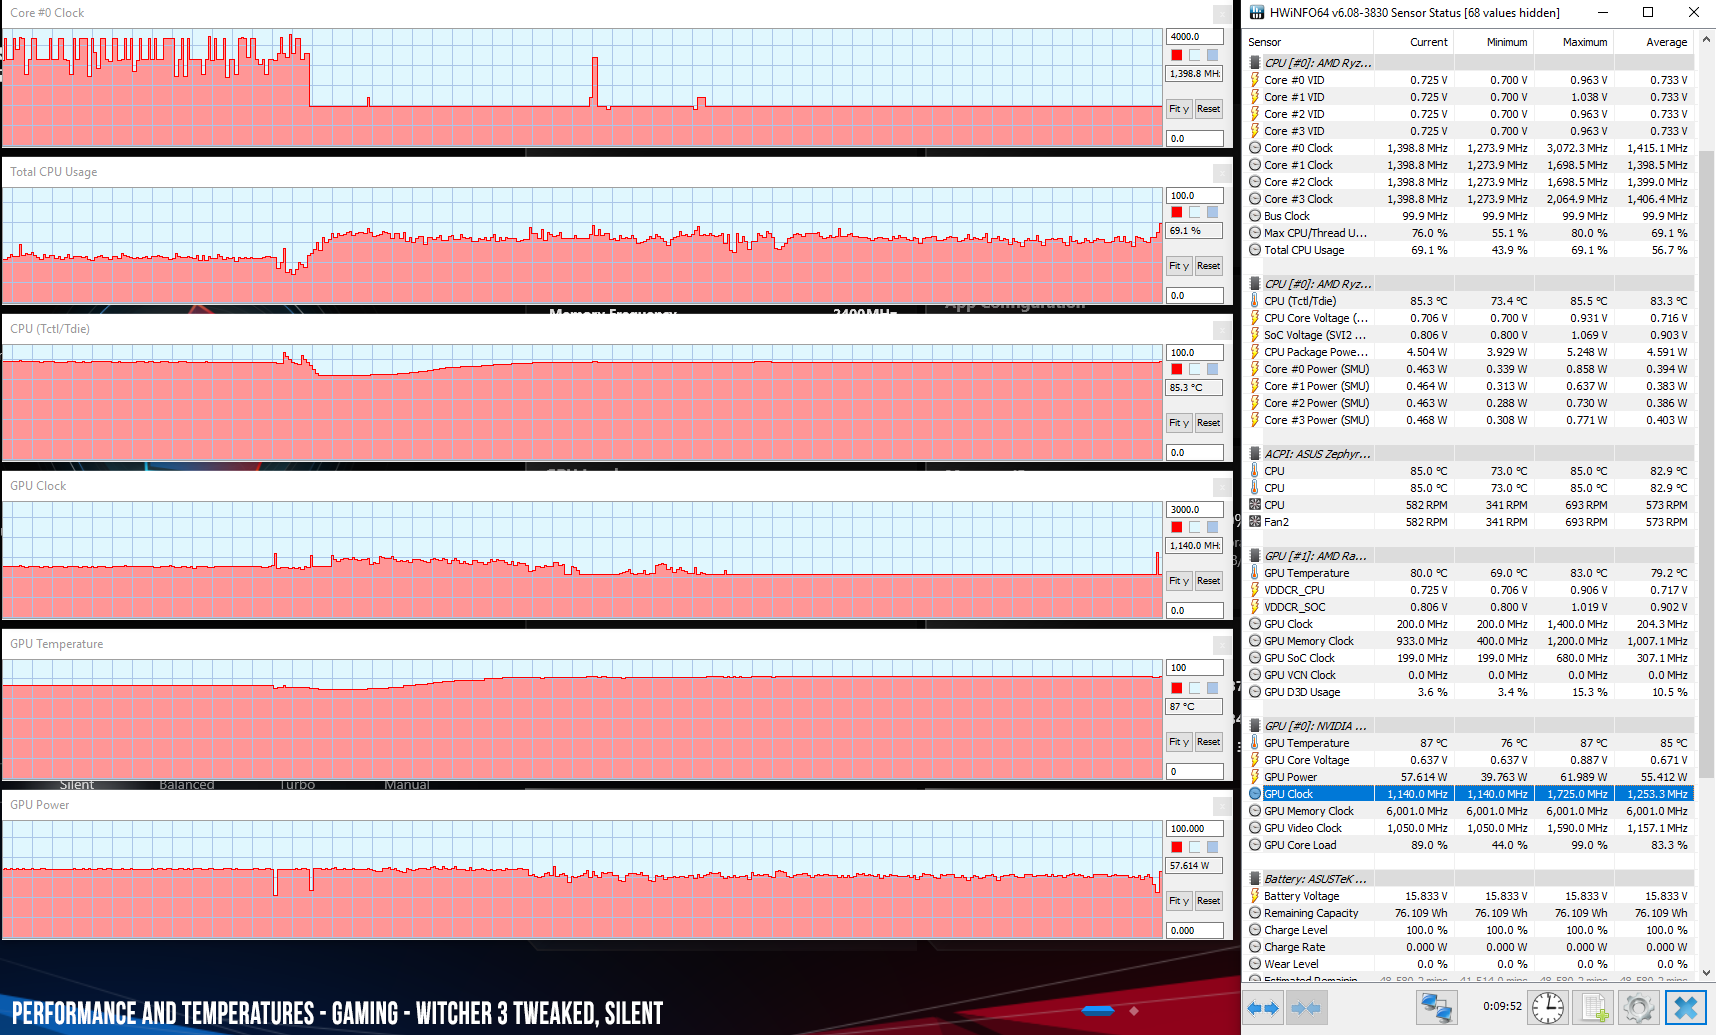 perf temps gaming witcher3 oc silent